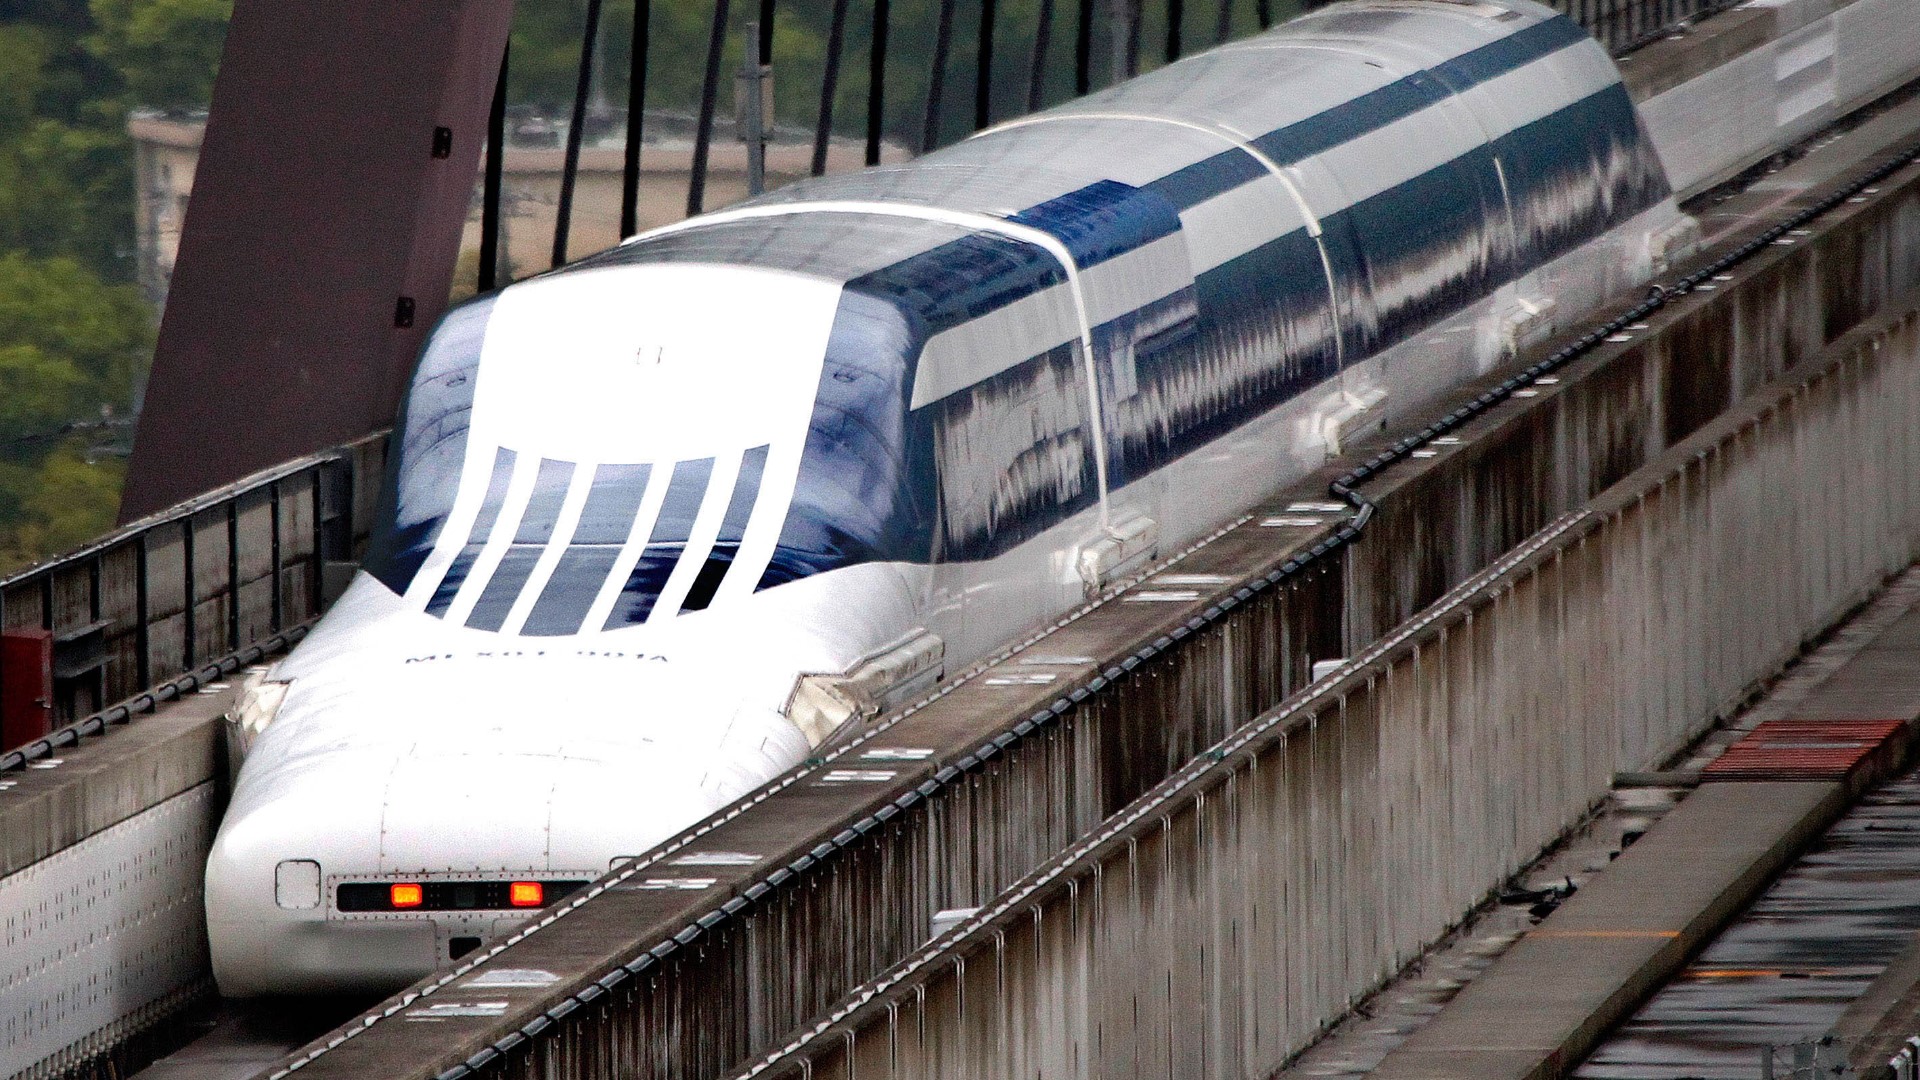 A proposed 311 mph train linking DC & Baltimore could disrupt equipment at the National Security Agency & NASA, documents say. Train developers dispute the concerns.